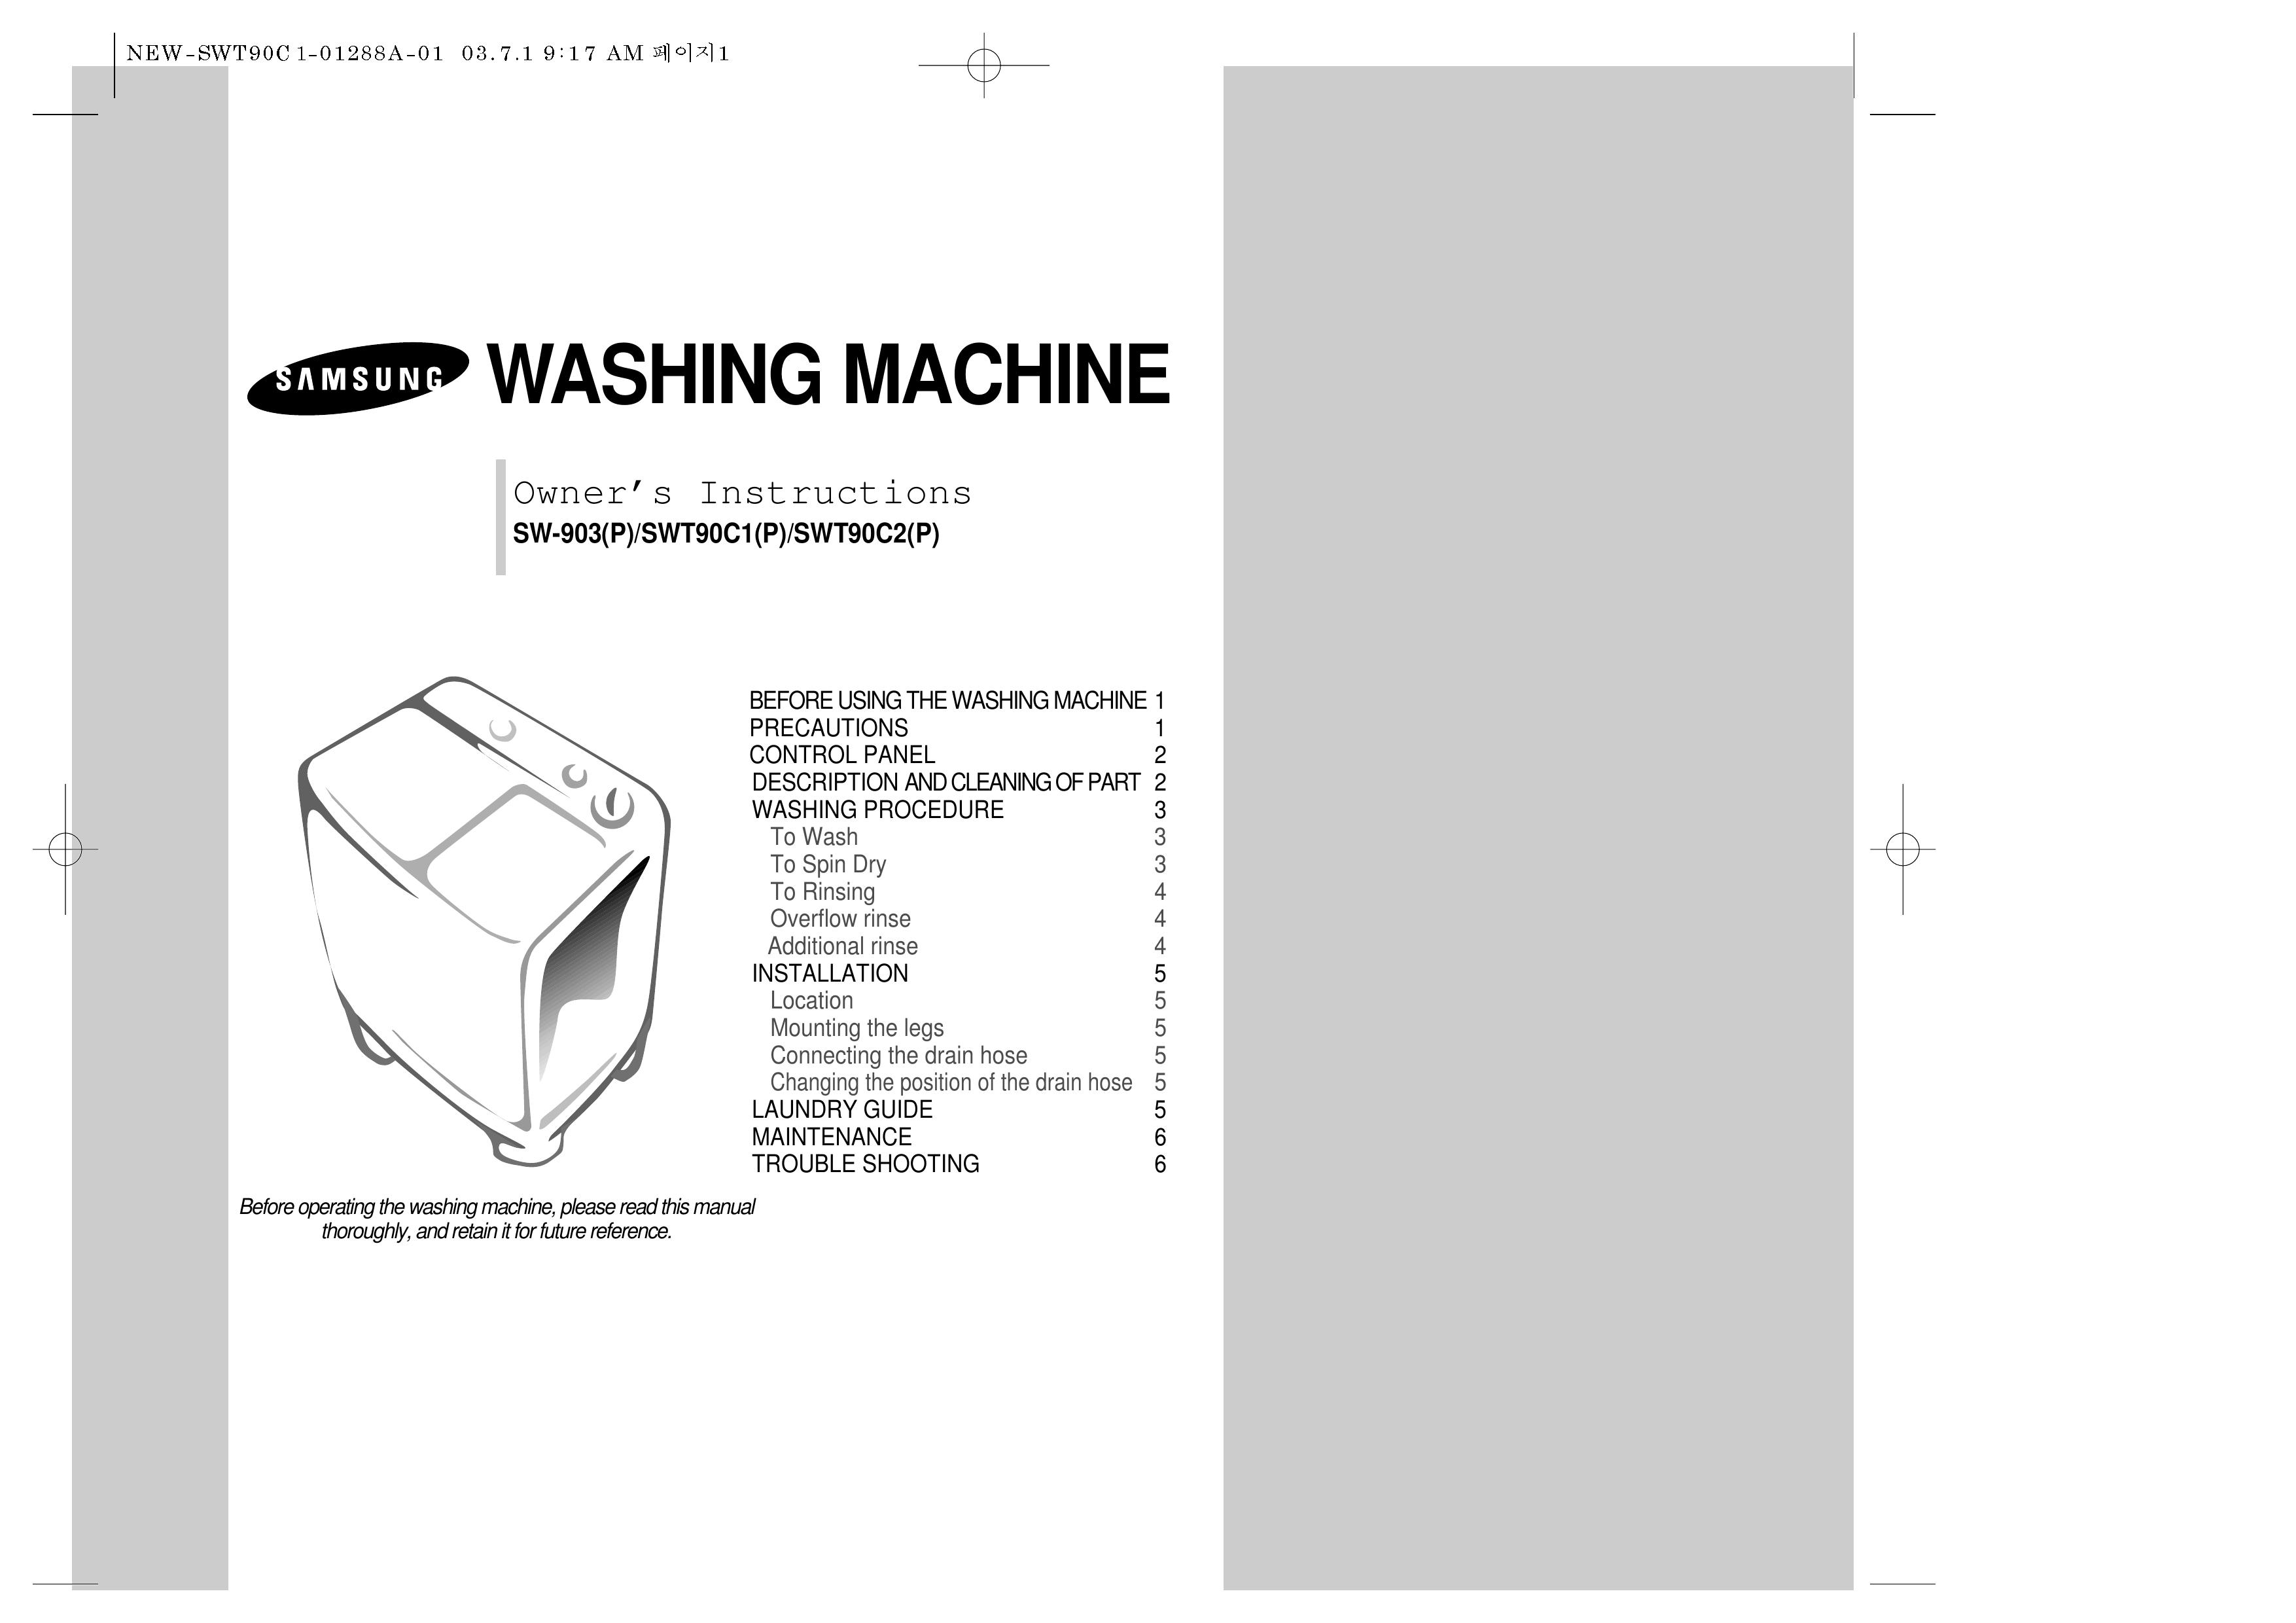 Samsung SWT90C2(P) Washer/Dryer User Manual